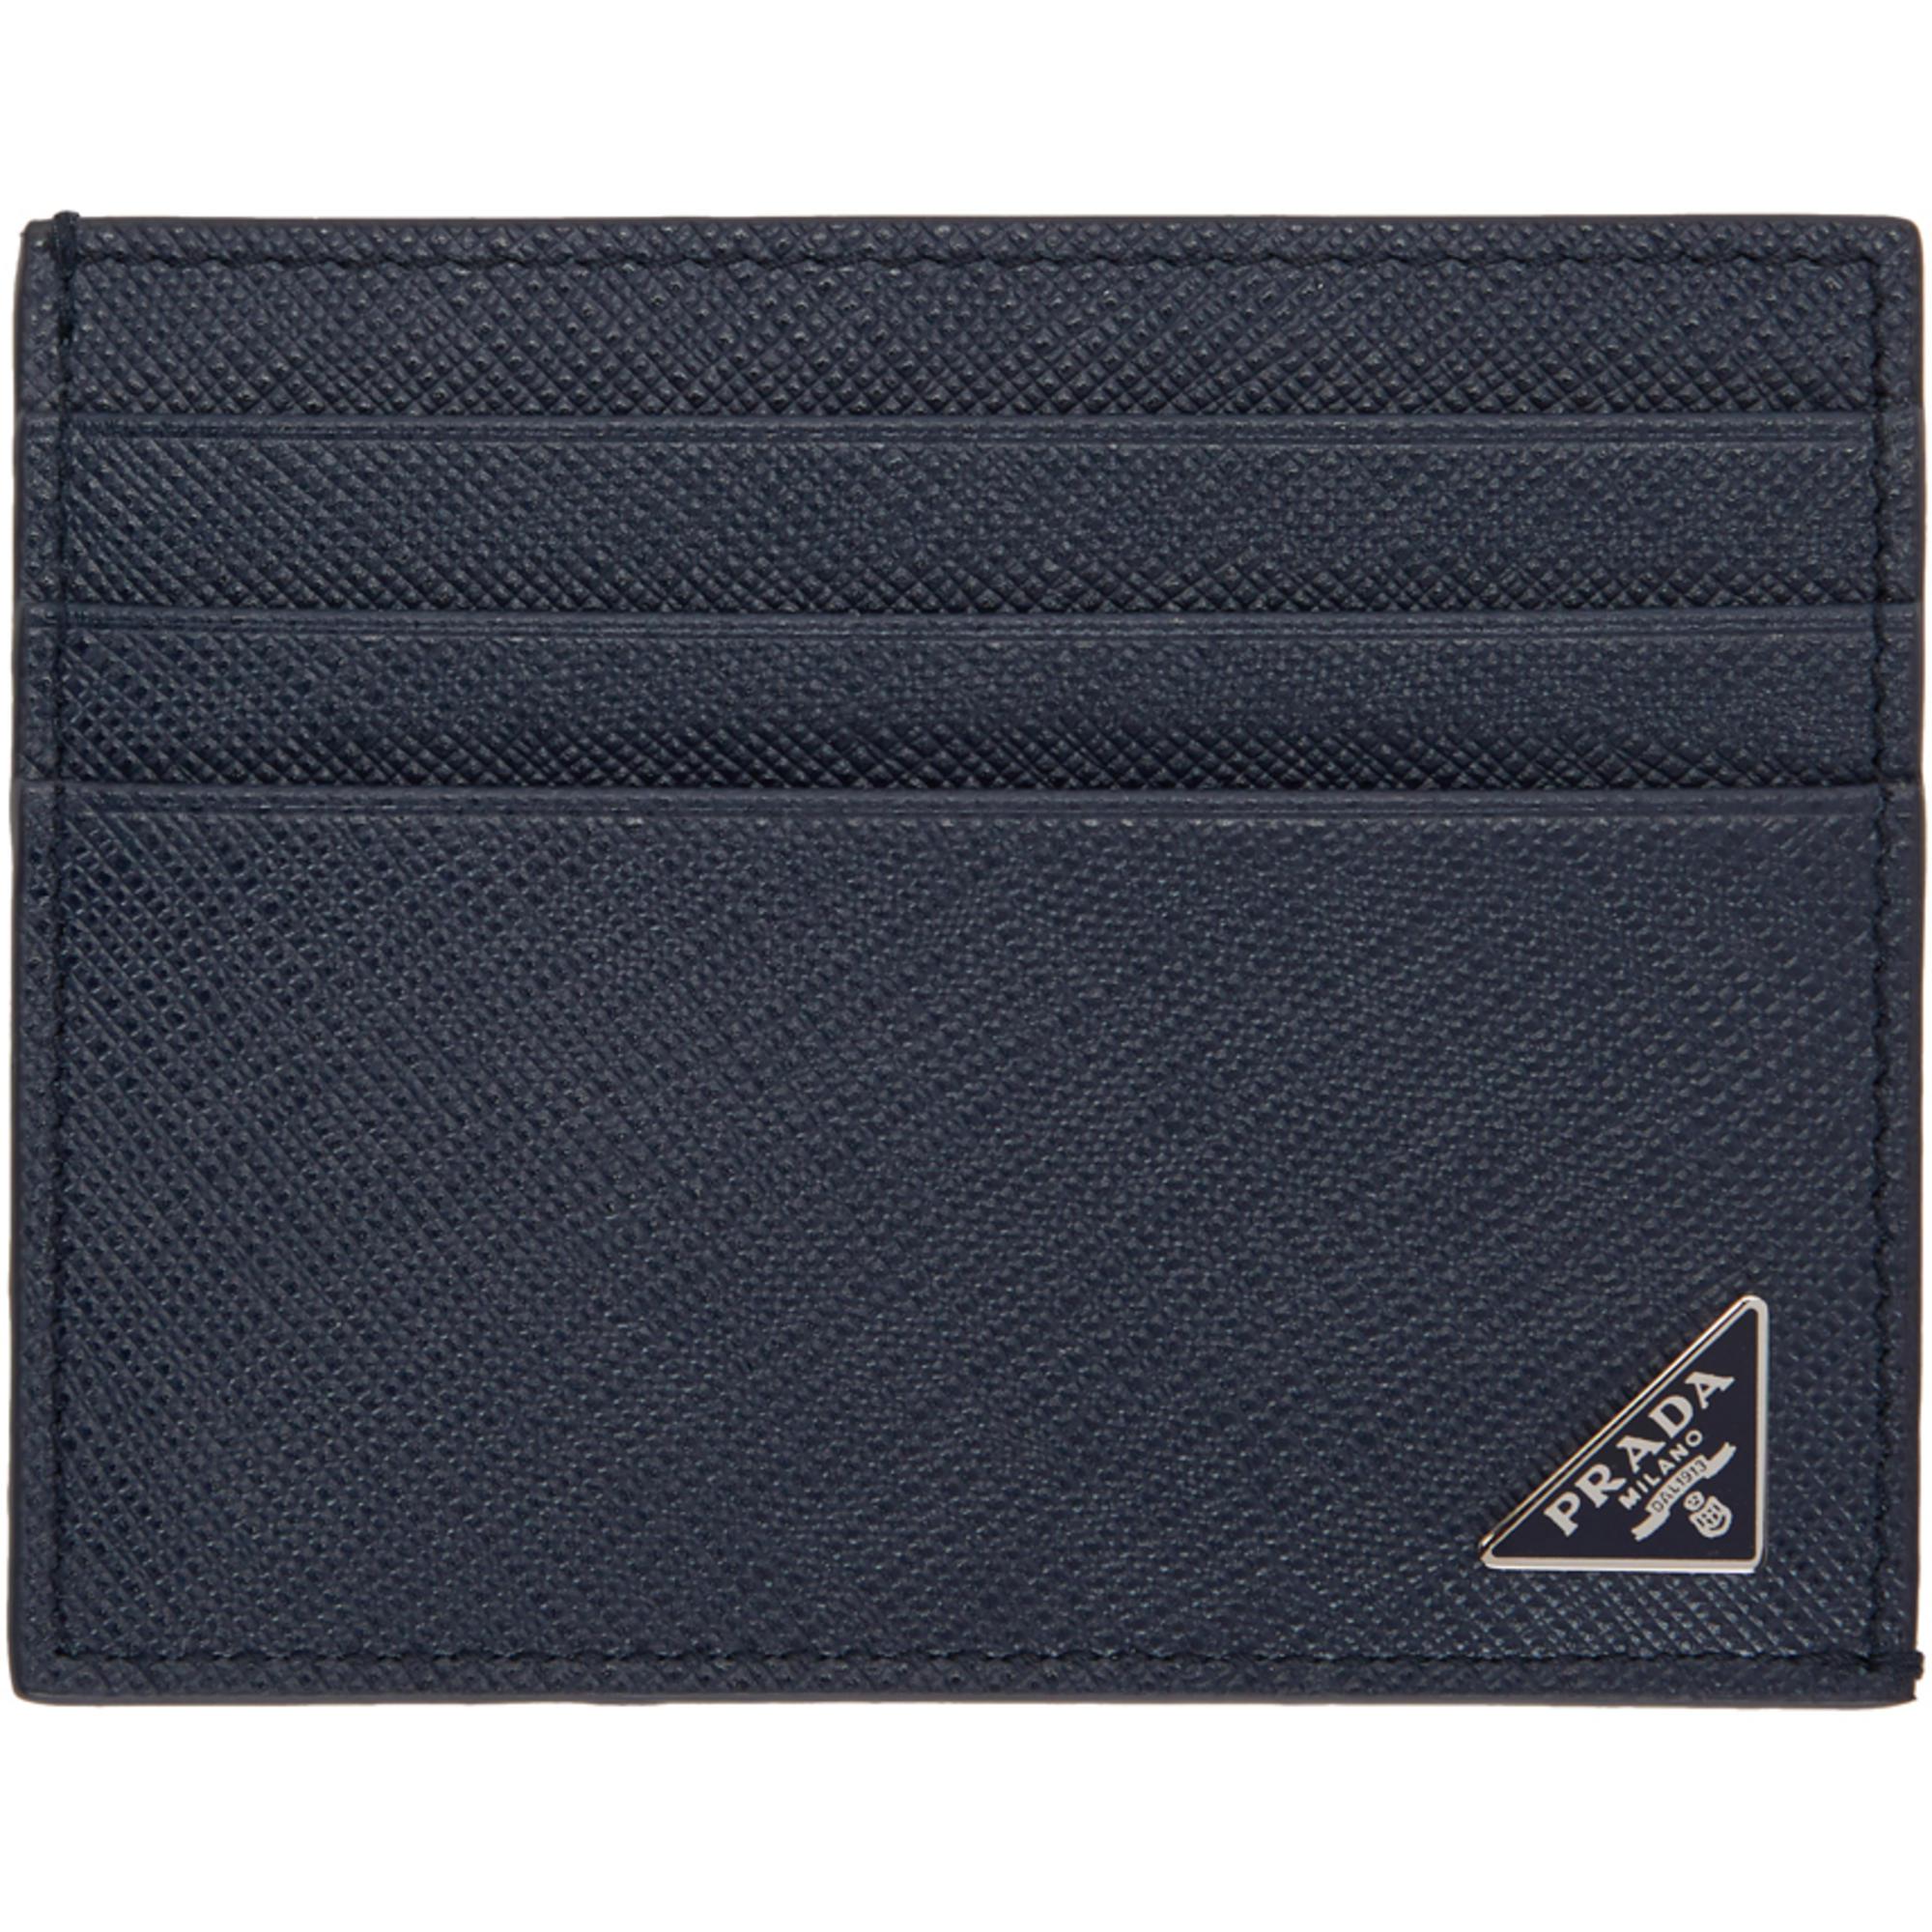 Prada Leather Navy Saffiano Card Holder in Blue for Men - Lyst